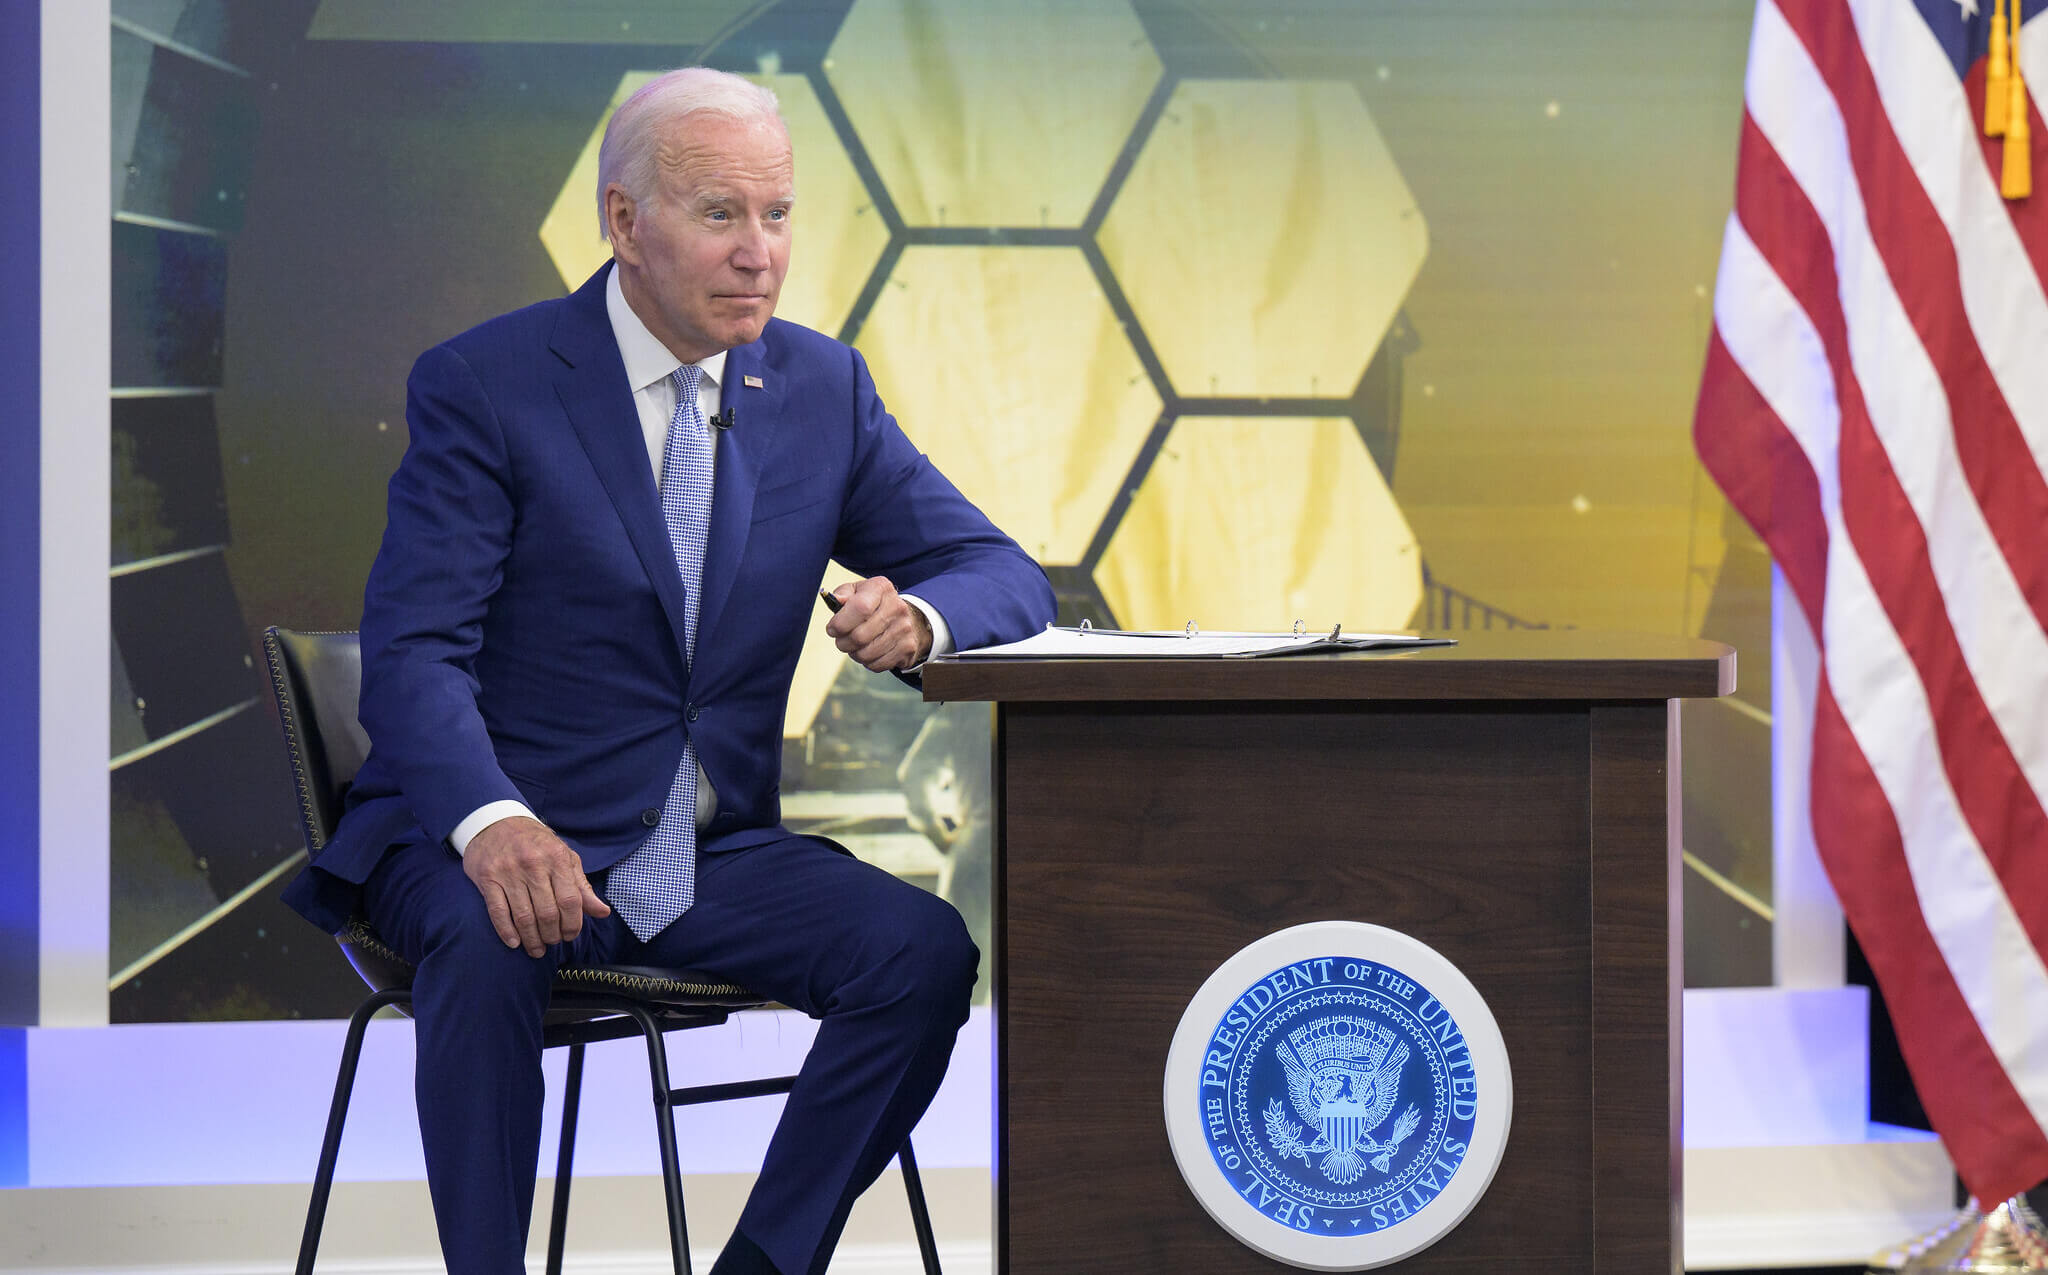 Biden travels to Poland to suppress pragmatic voices for peace in Europe - DOS
